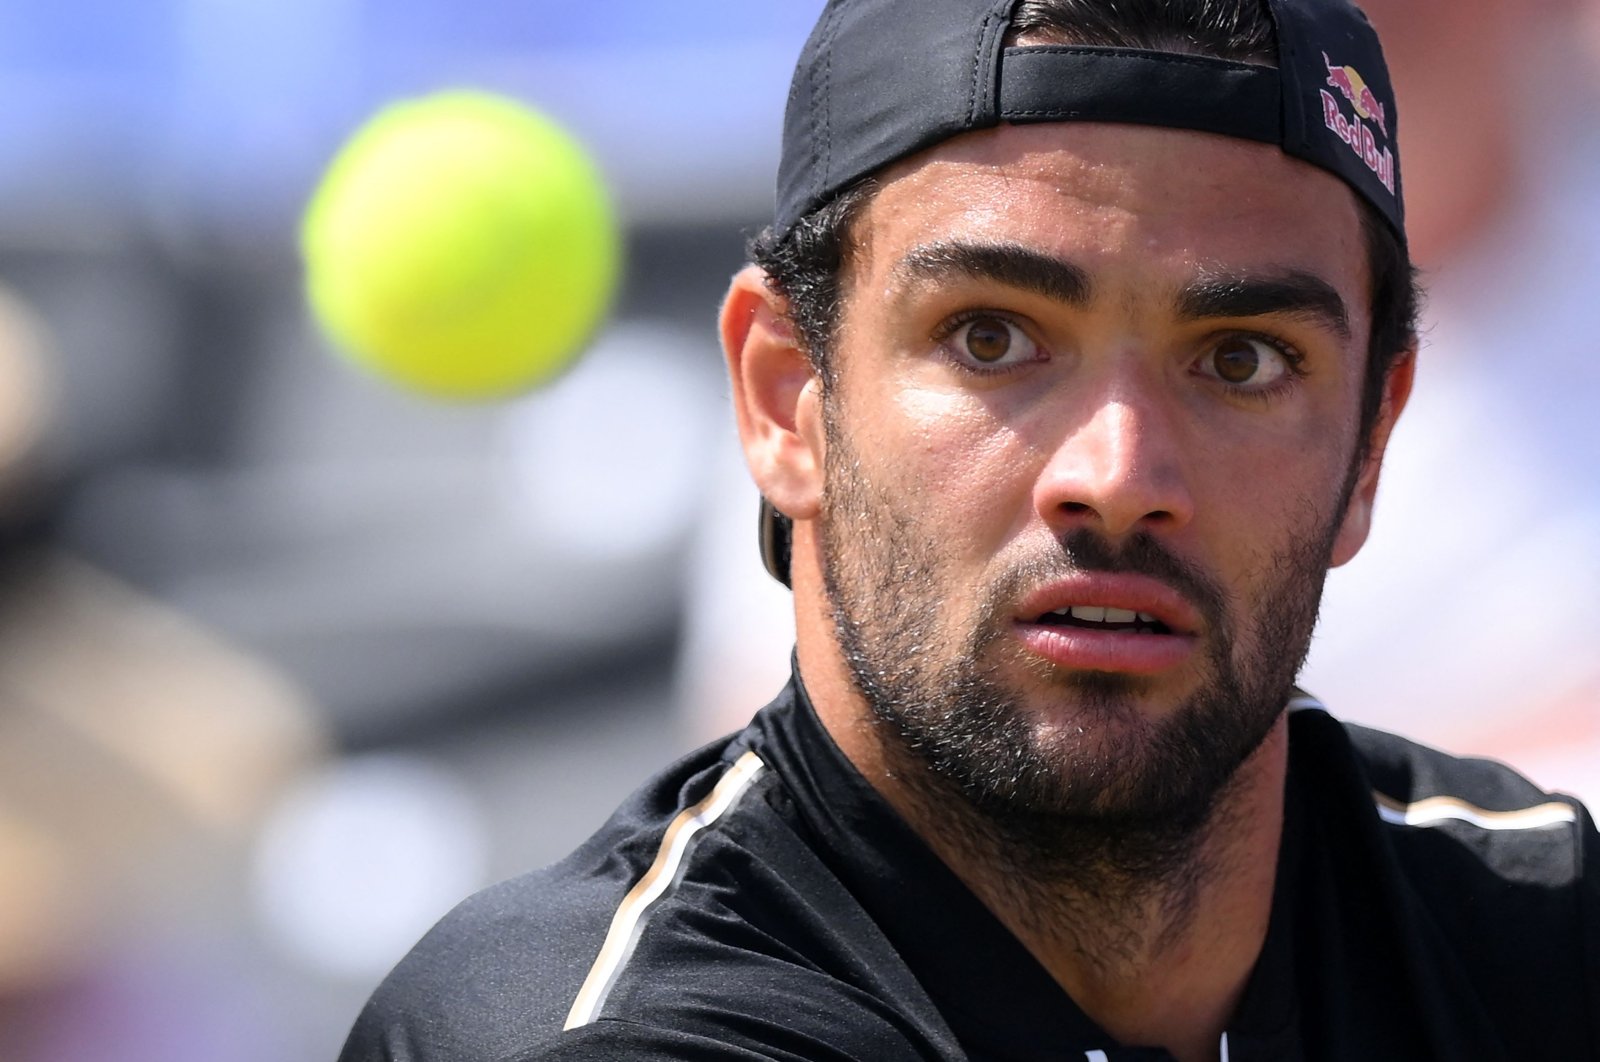 Matteo Berrettini in action at the ATP Championships, London, England, June 17, 2022. (AFP Photo)